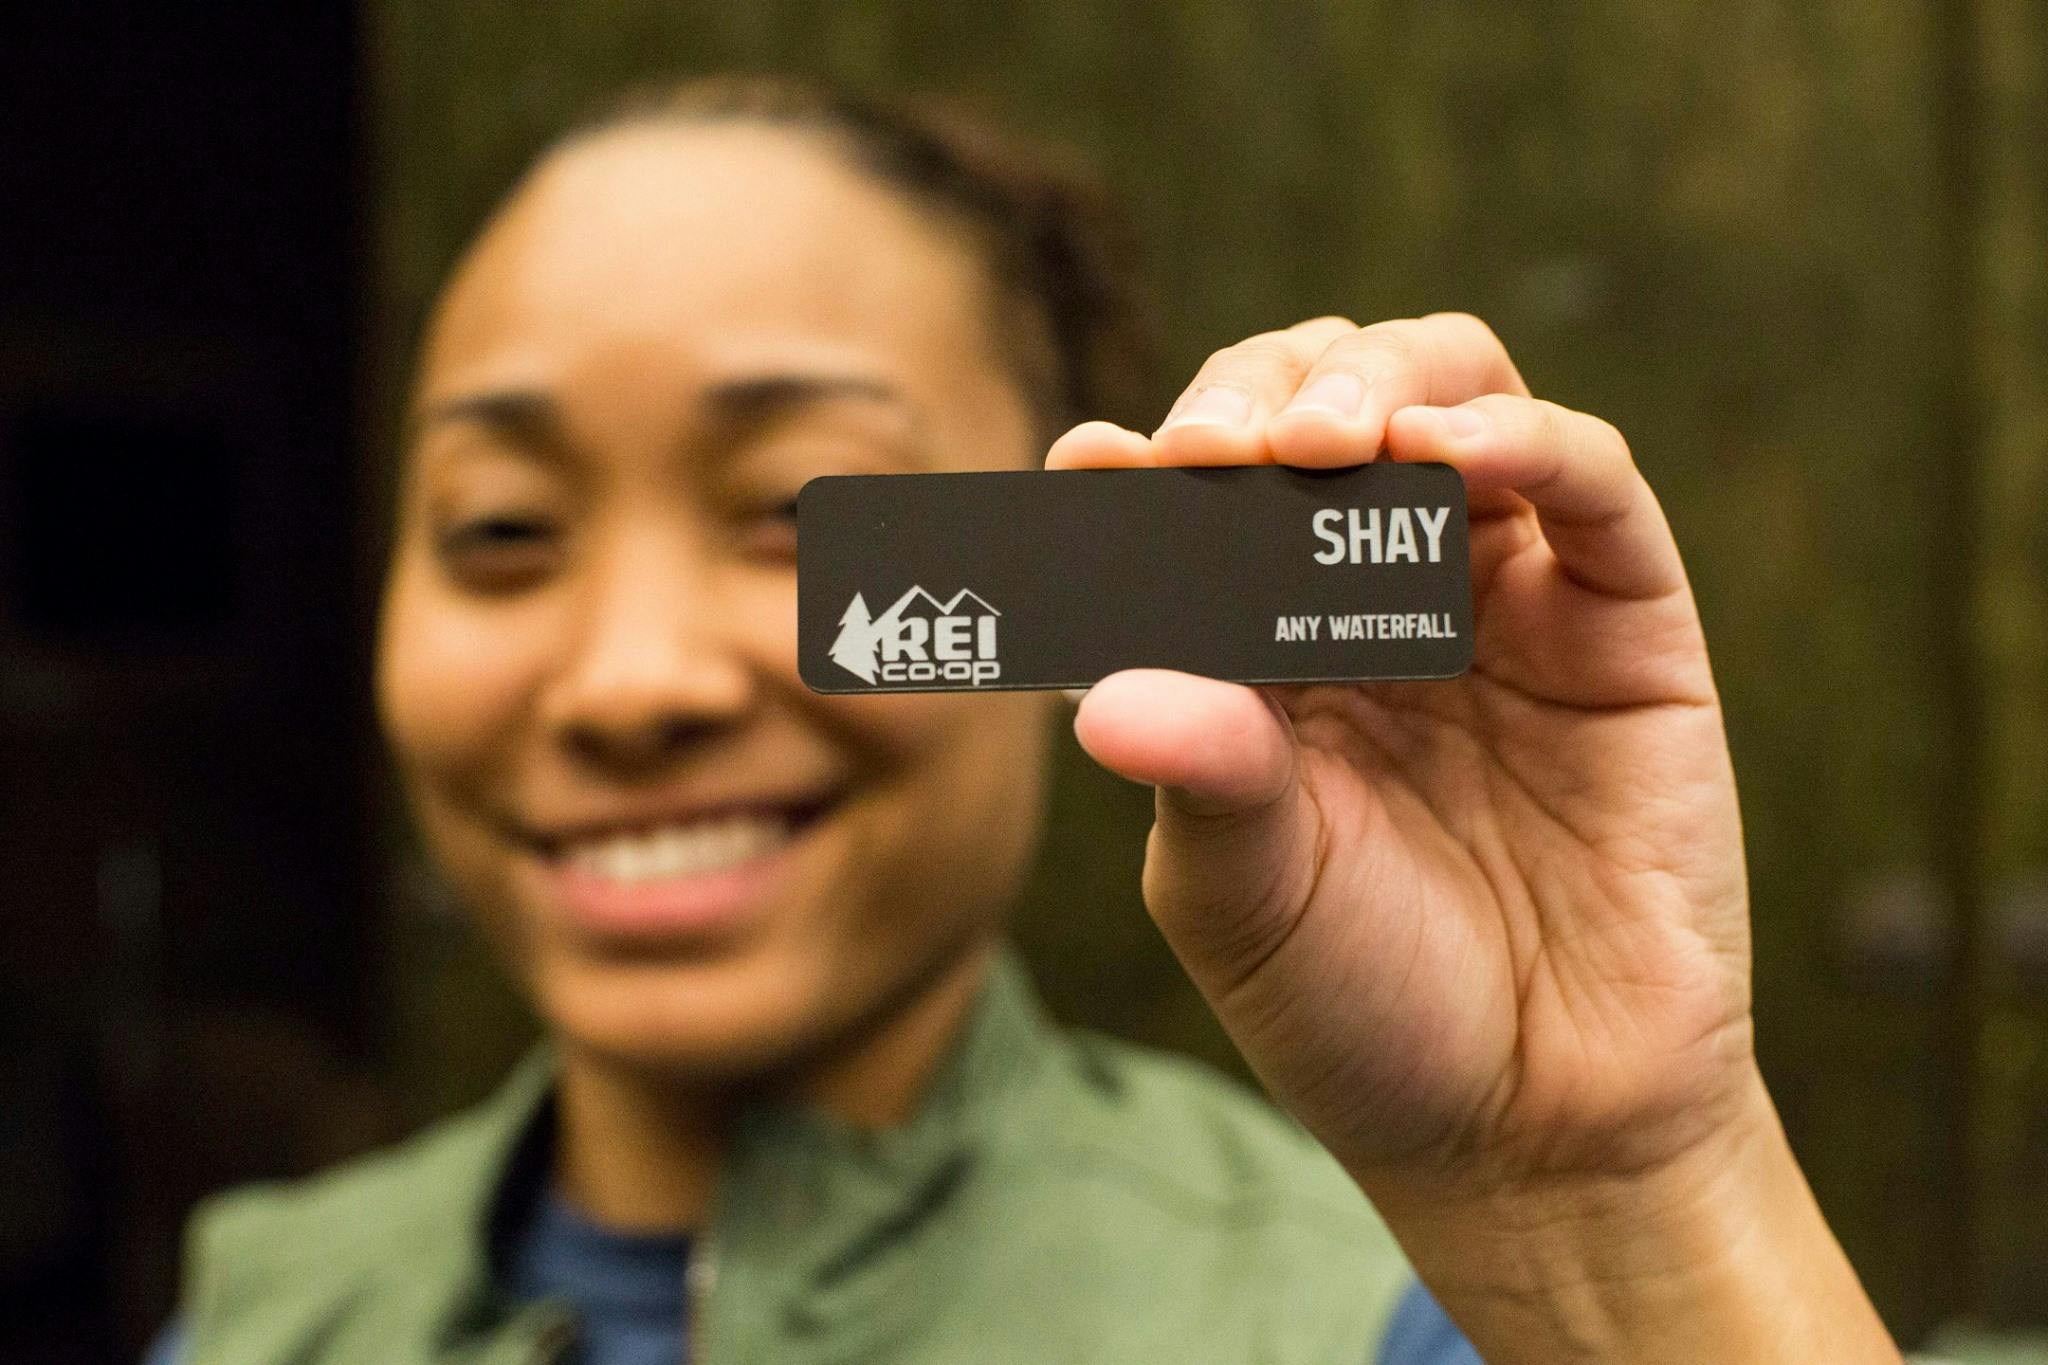 A woman holding up an REI employee name tag that reads "Shay